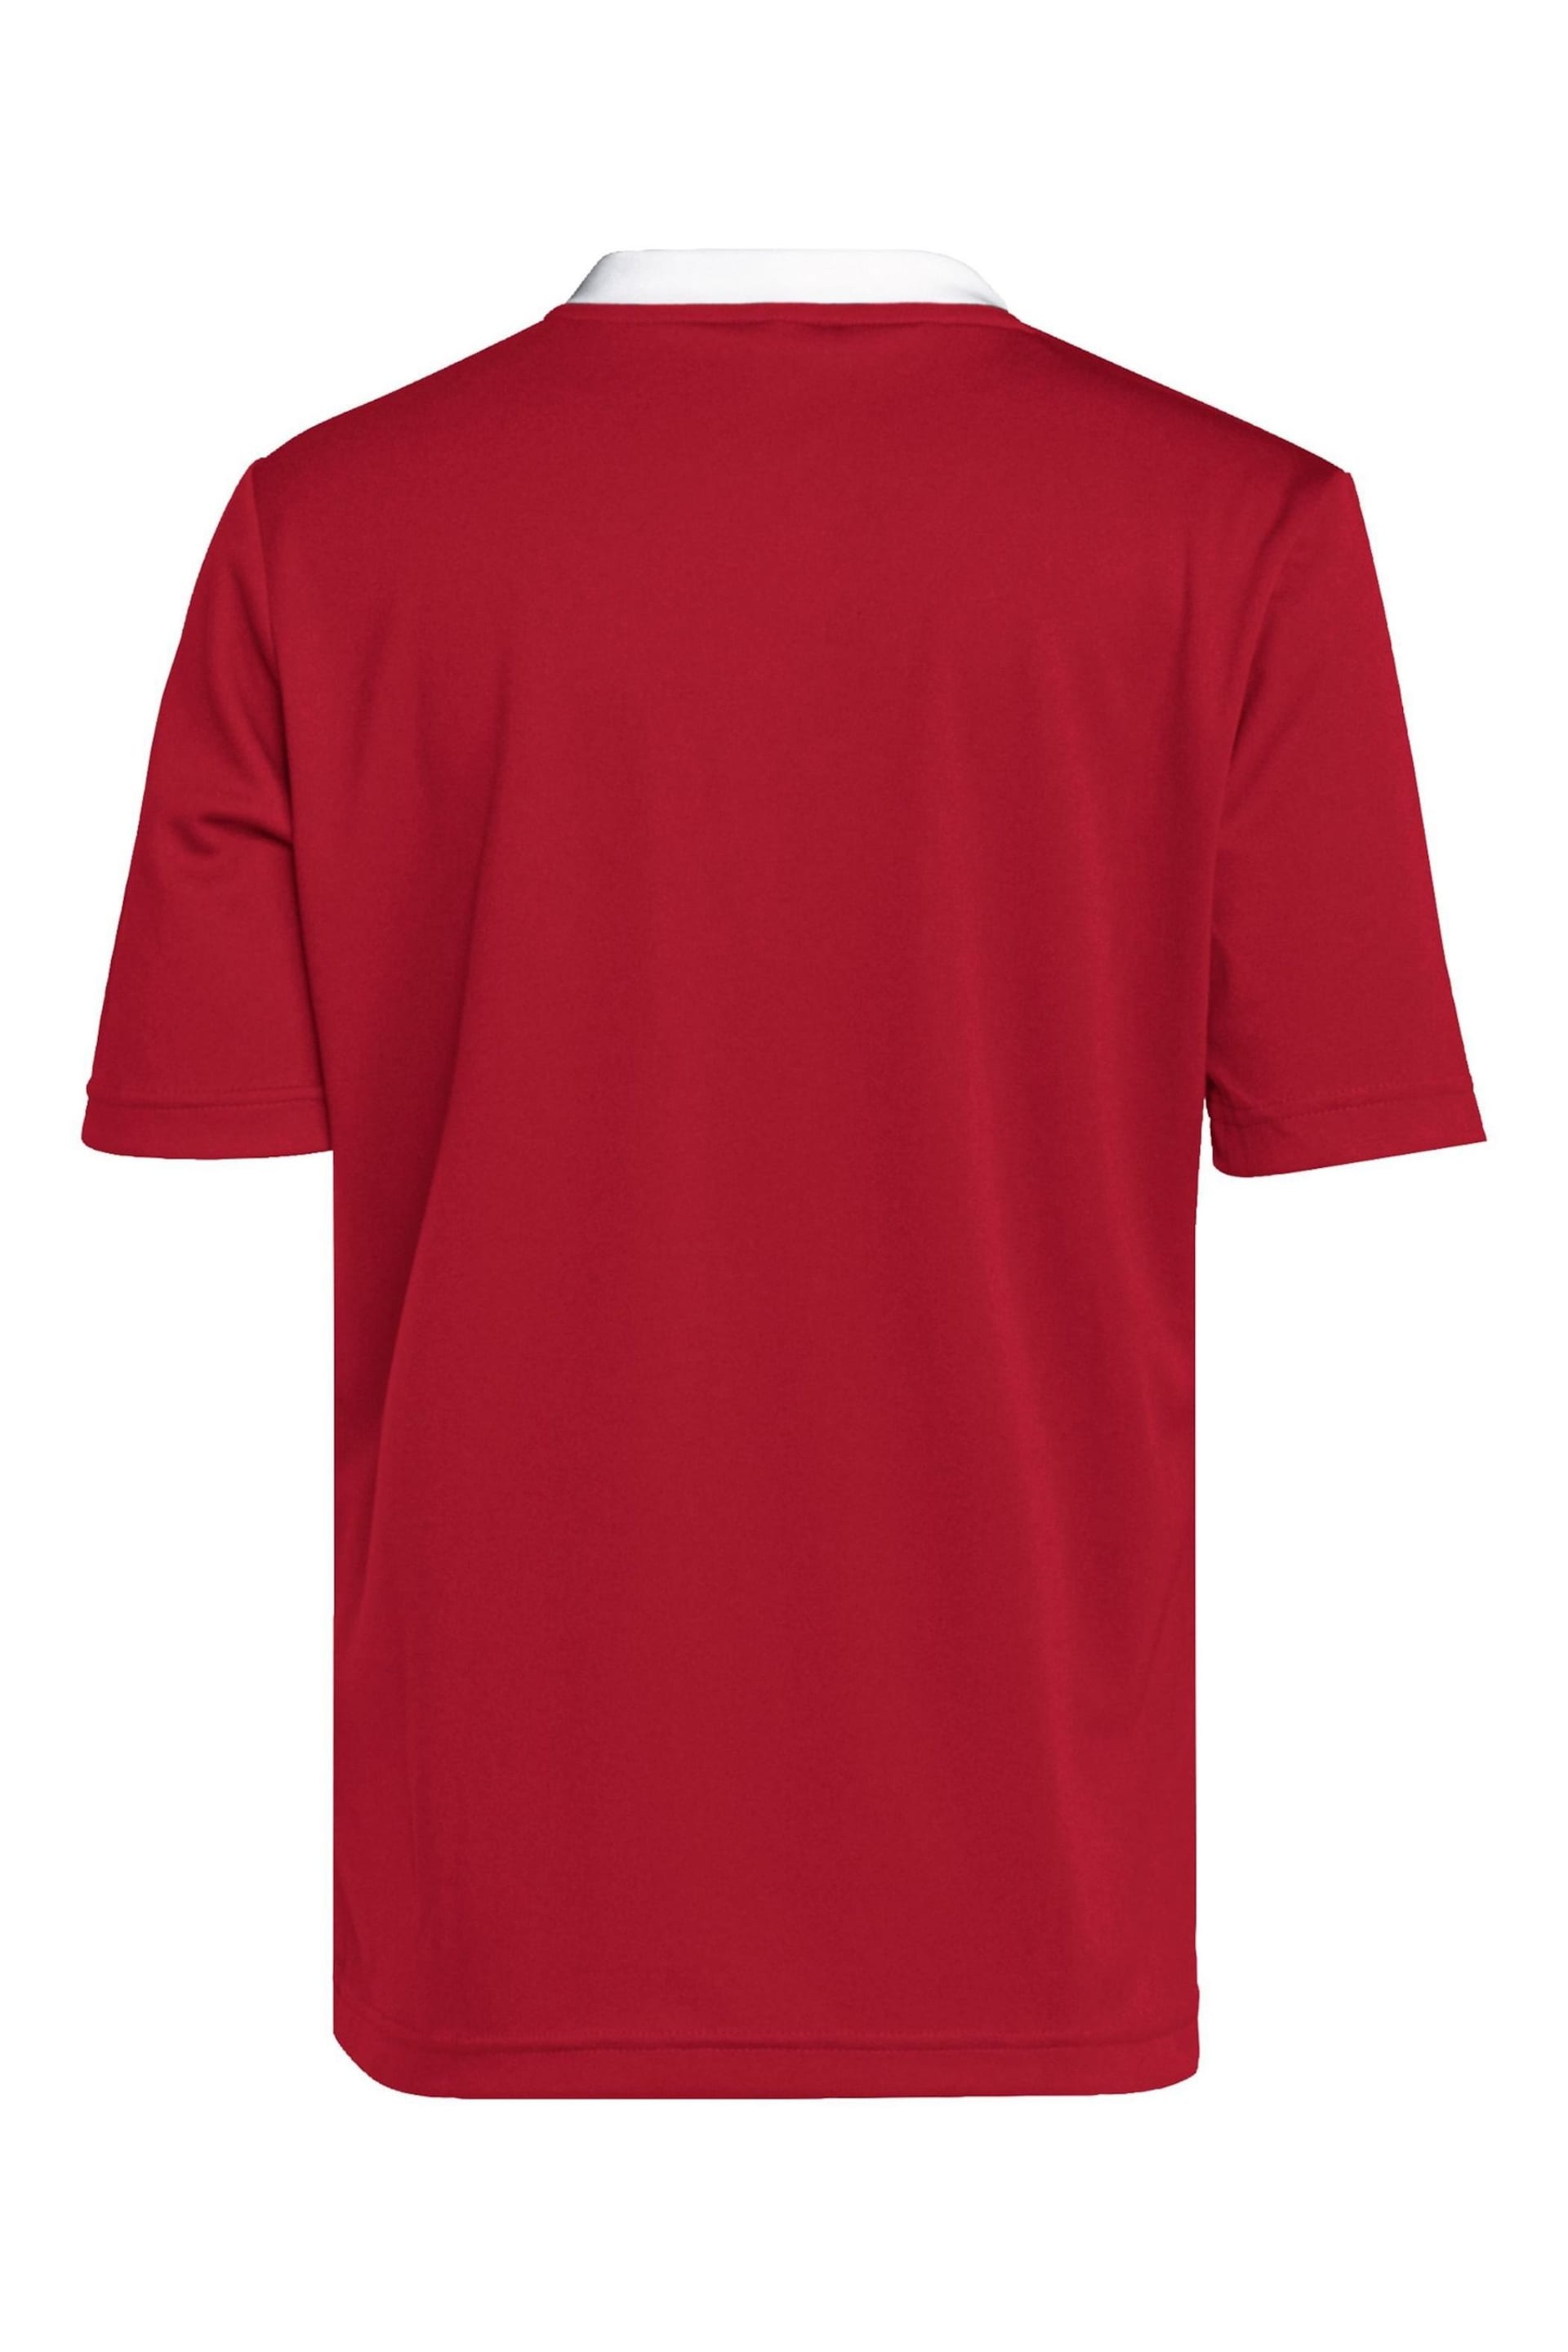 adidas Red Entrada 22 Jersey - Image 2 of 4